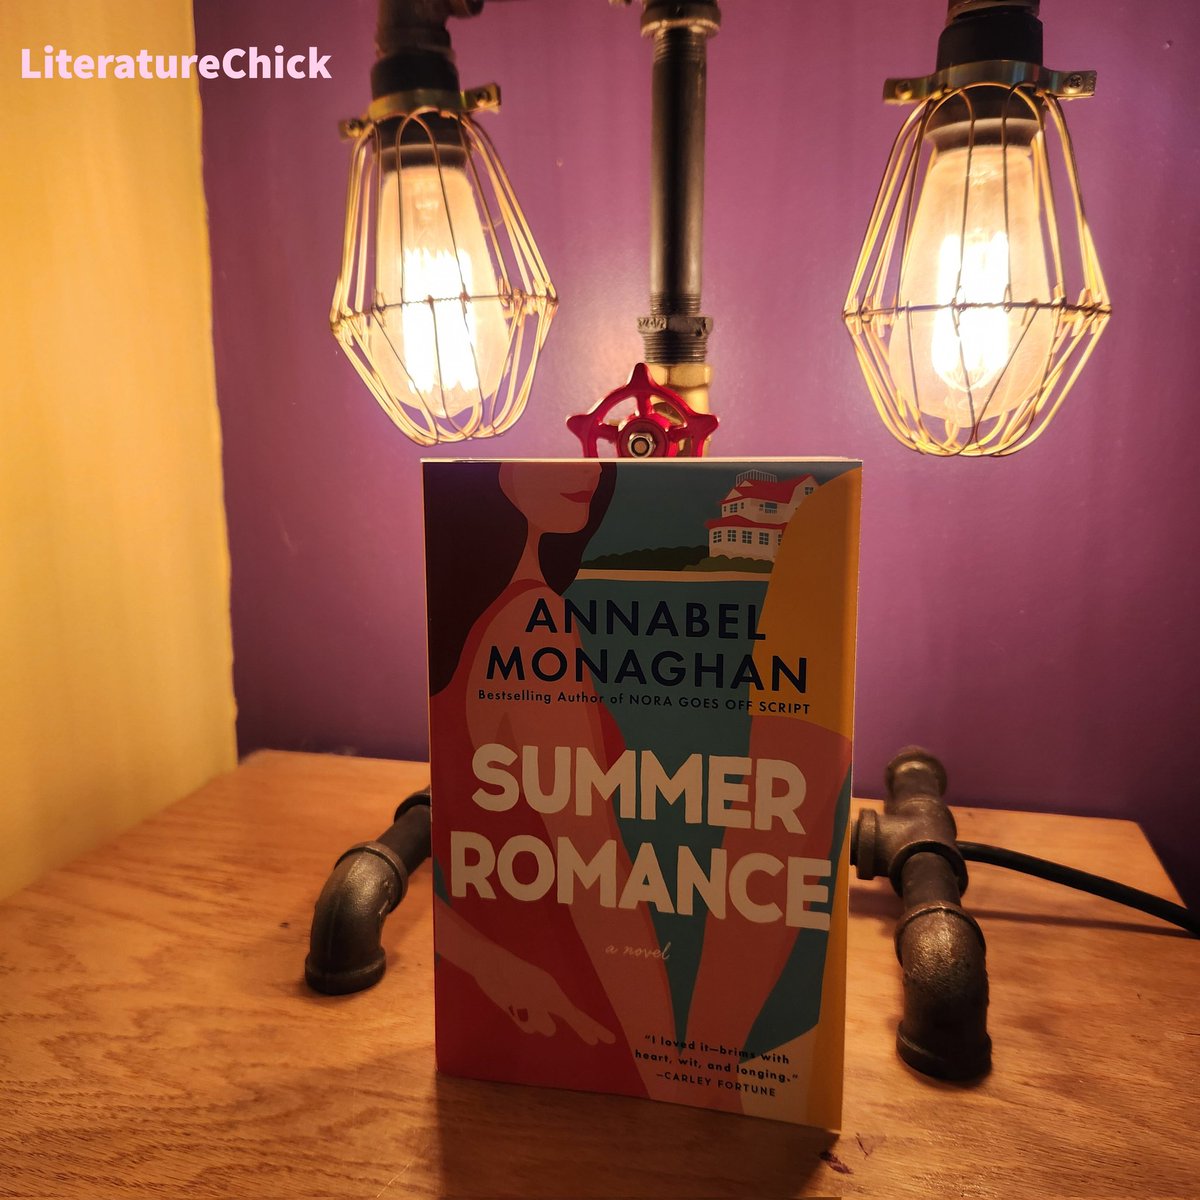 Friday Most Anticipated Summer Read Bookmail! Thank you to @PutnamBooks @penguinrandom for sending me a copy of Summer Romance by @AnnabelMonaghan .

#Bookmail #SummerRomance #MostAnticipatedBooks #tbr #LiteratureChick #PutnamBooksInfluencer